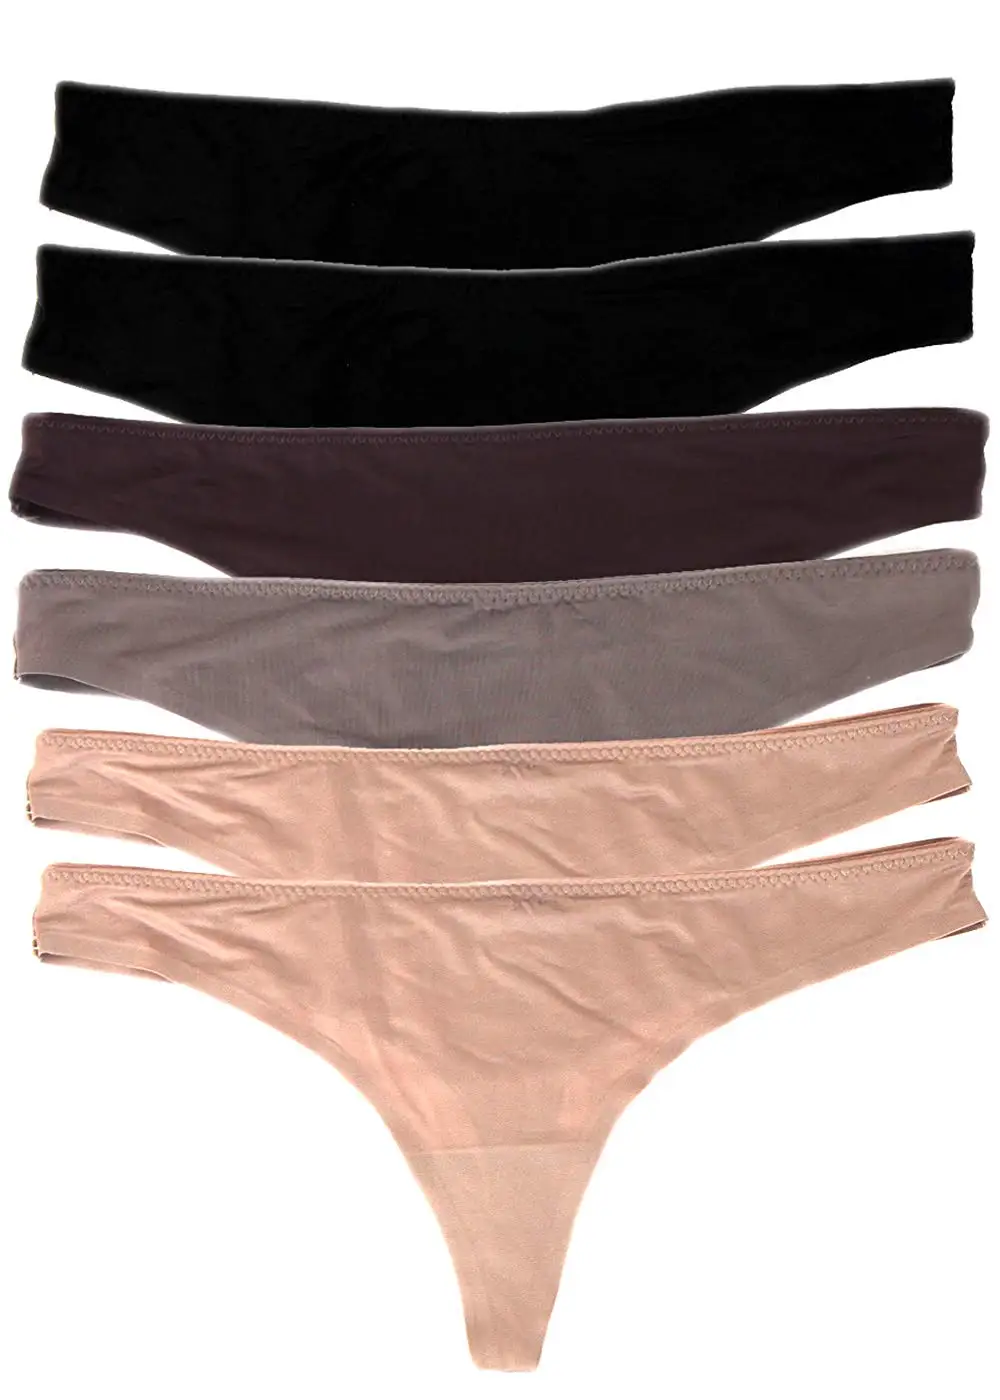 Cheap Thong Invisible, find Thong Invisible deals on line at Alibaba.com